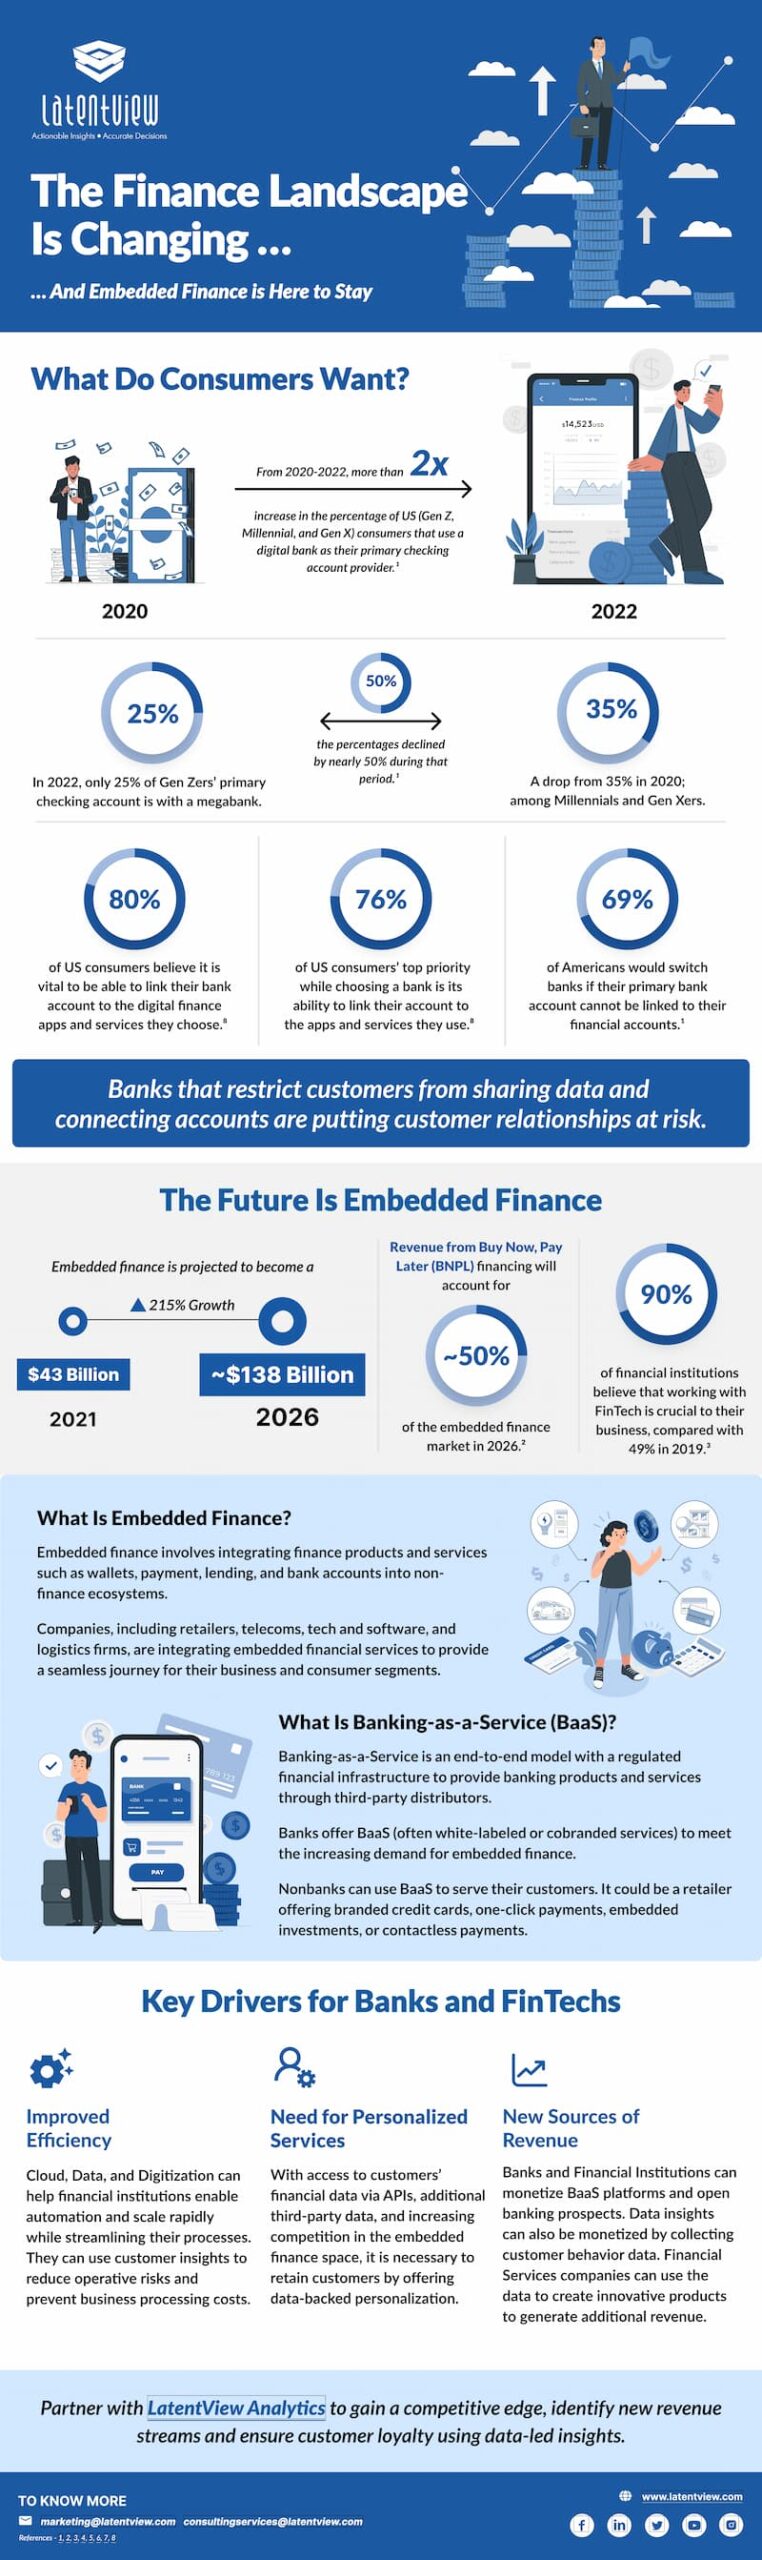 The Finance Landscape Is Changing And Embedded Finance is Here to Stay